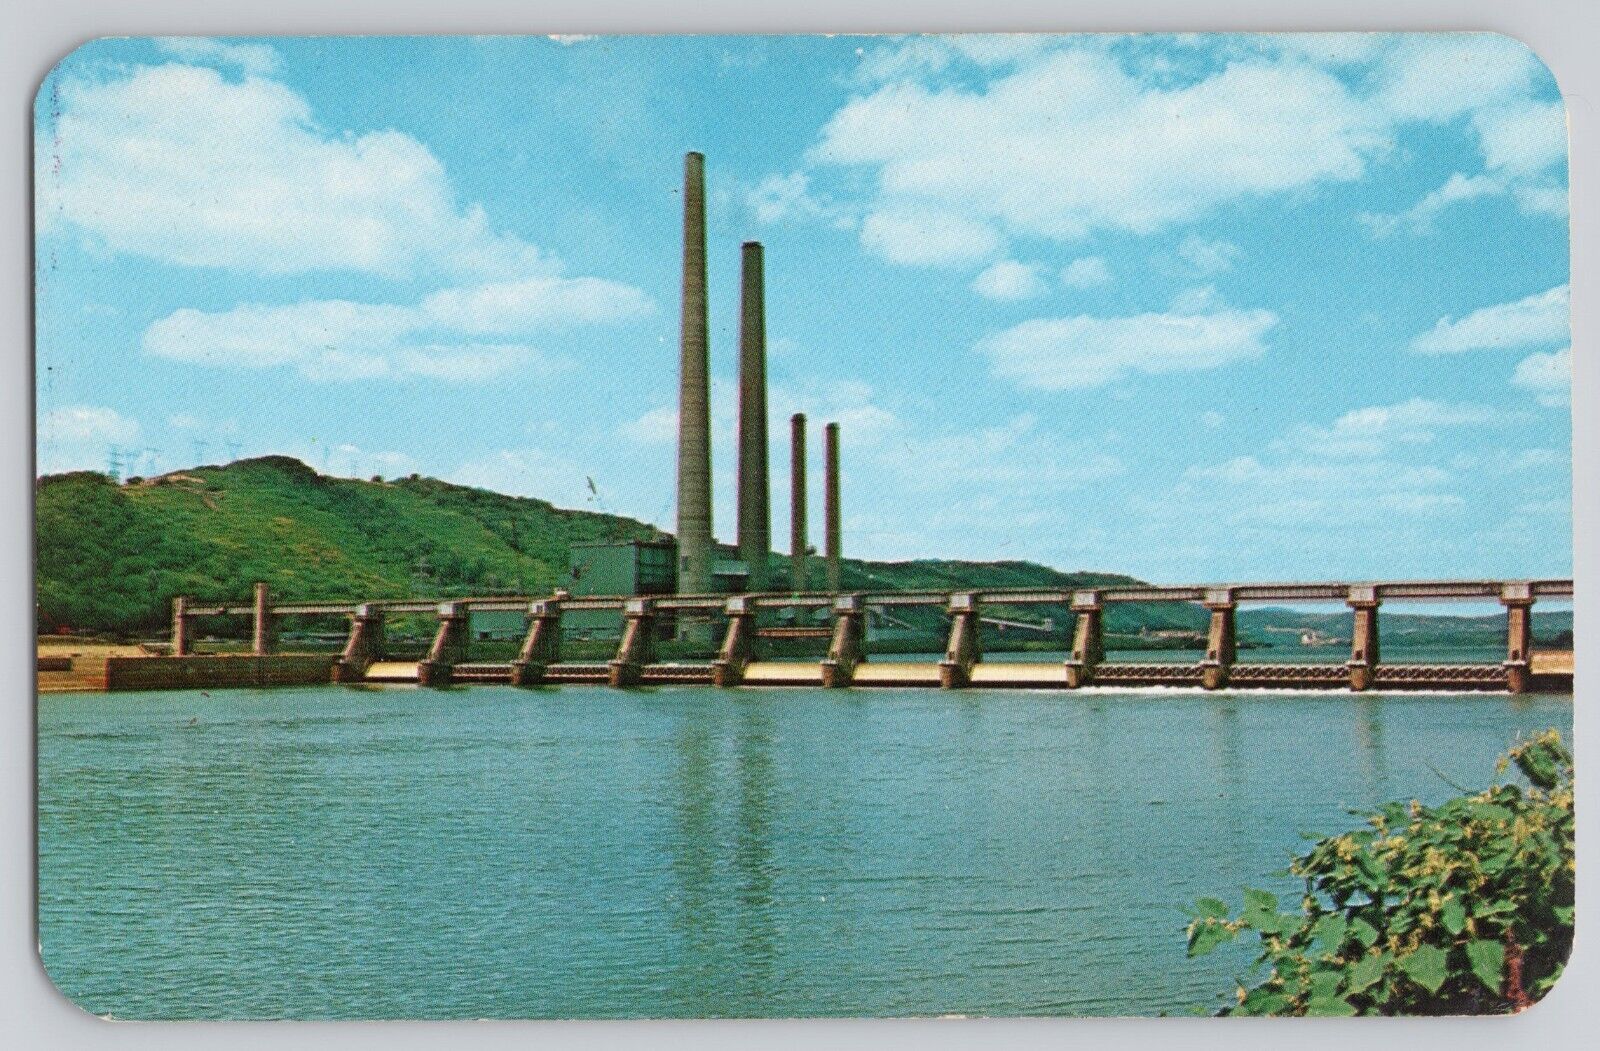 New Cumberland Locks and Dam Rounded Chrome Postcard Ohio River Stratton, OH